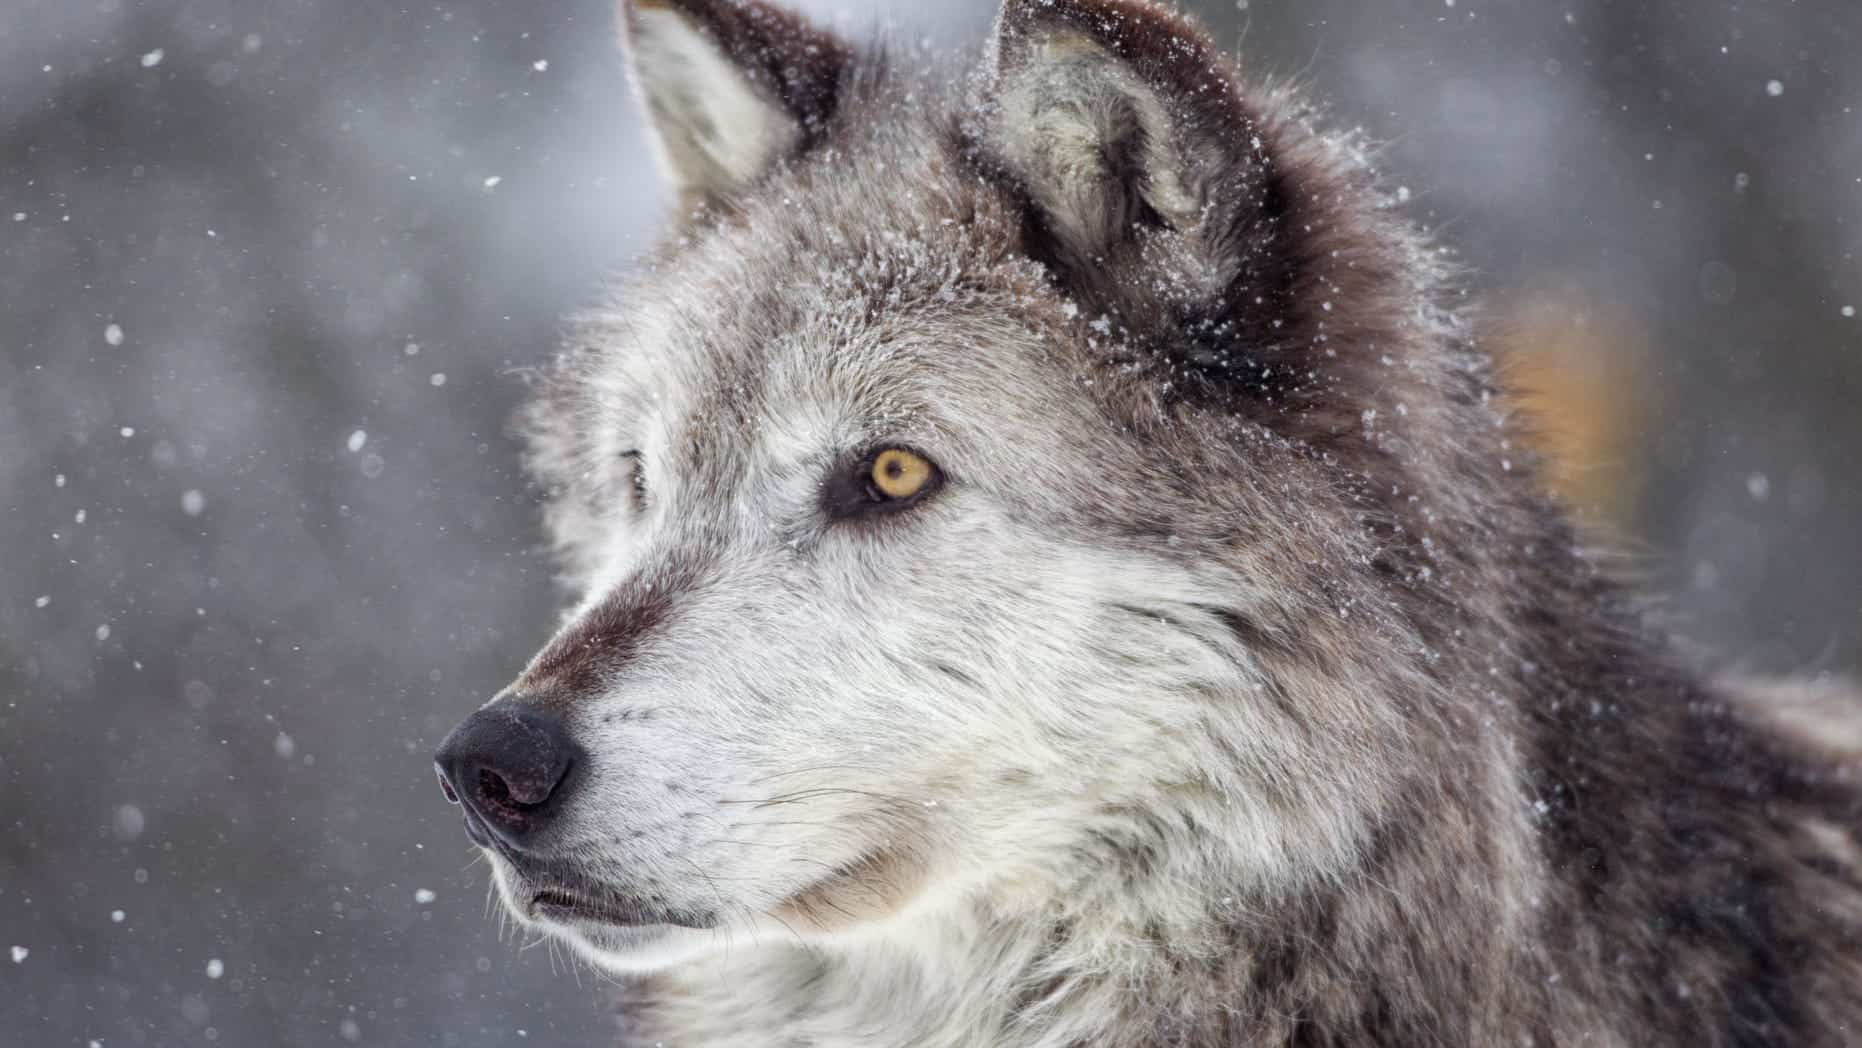 POLL: Should the Biden Administration reinstate the gray wolf on the List of Endangered and Threatened Wildlife?